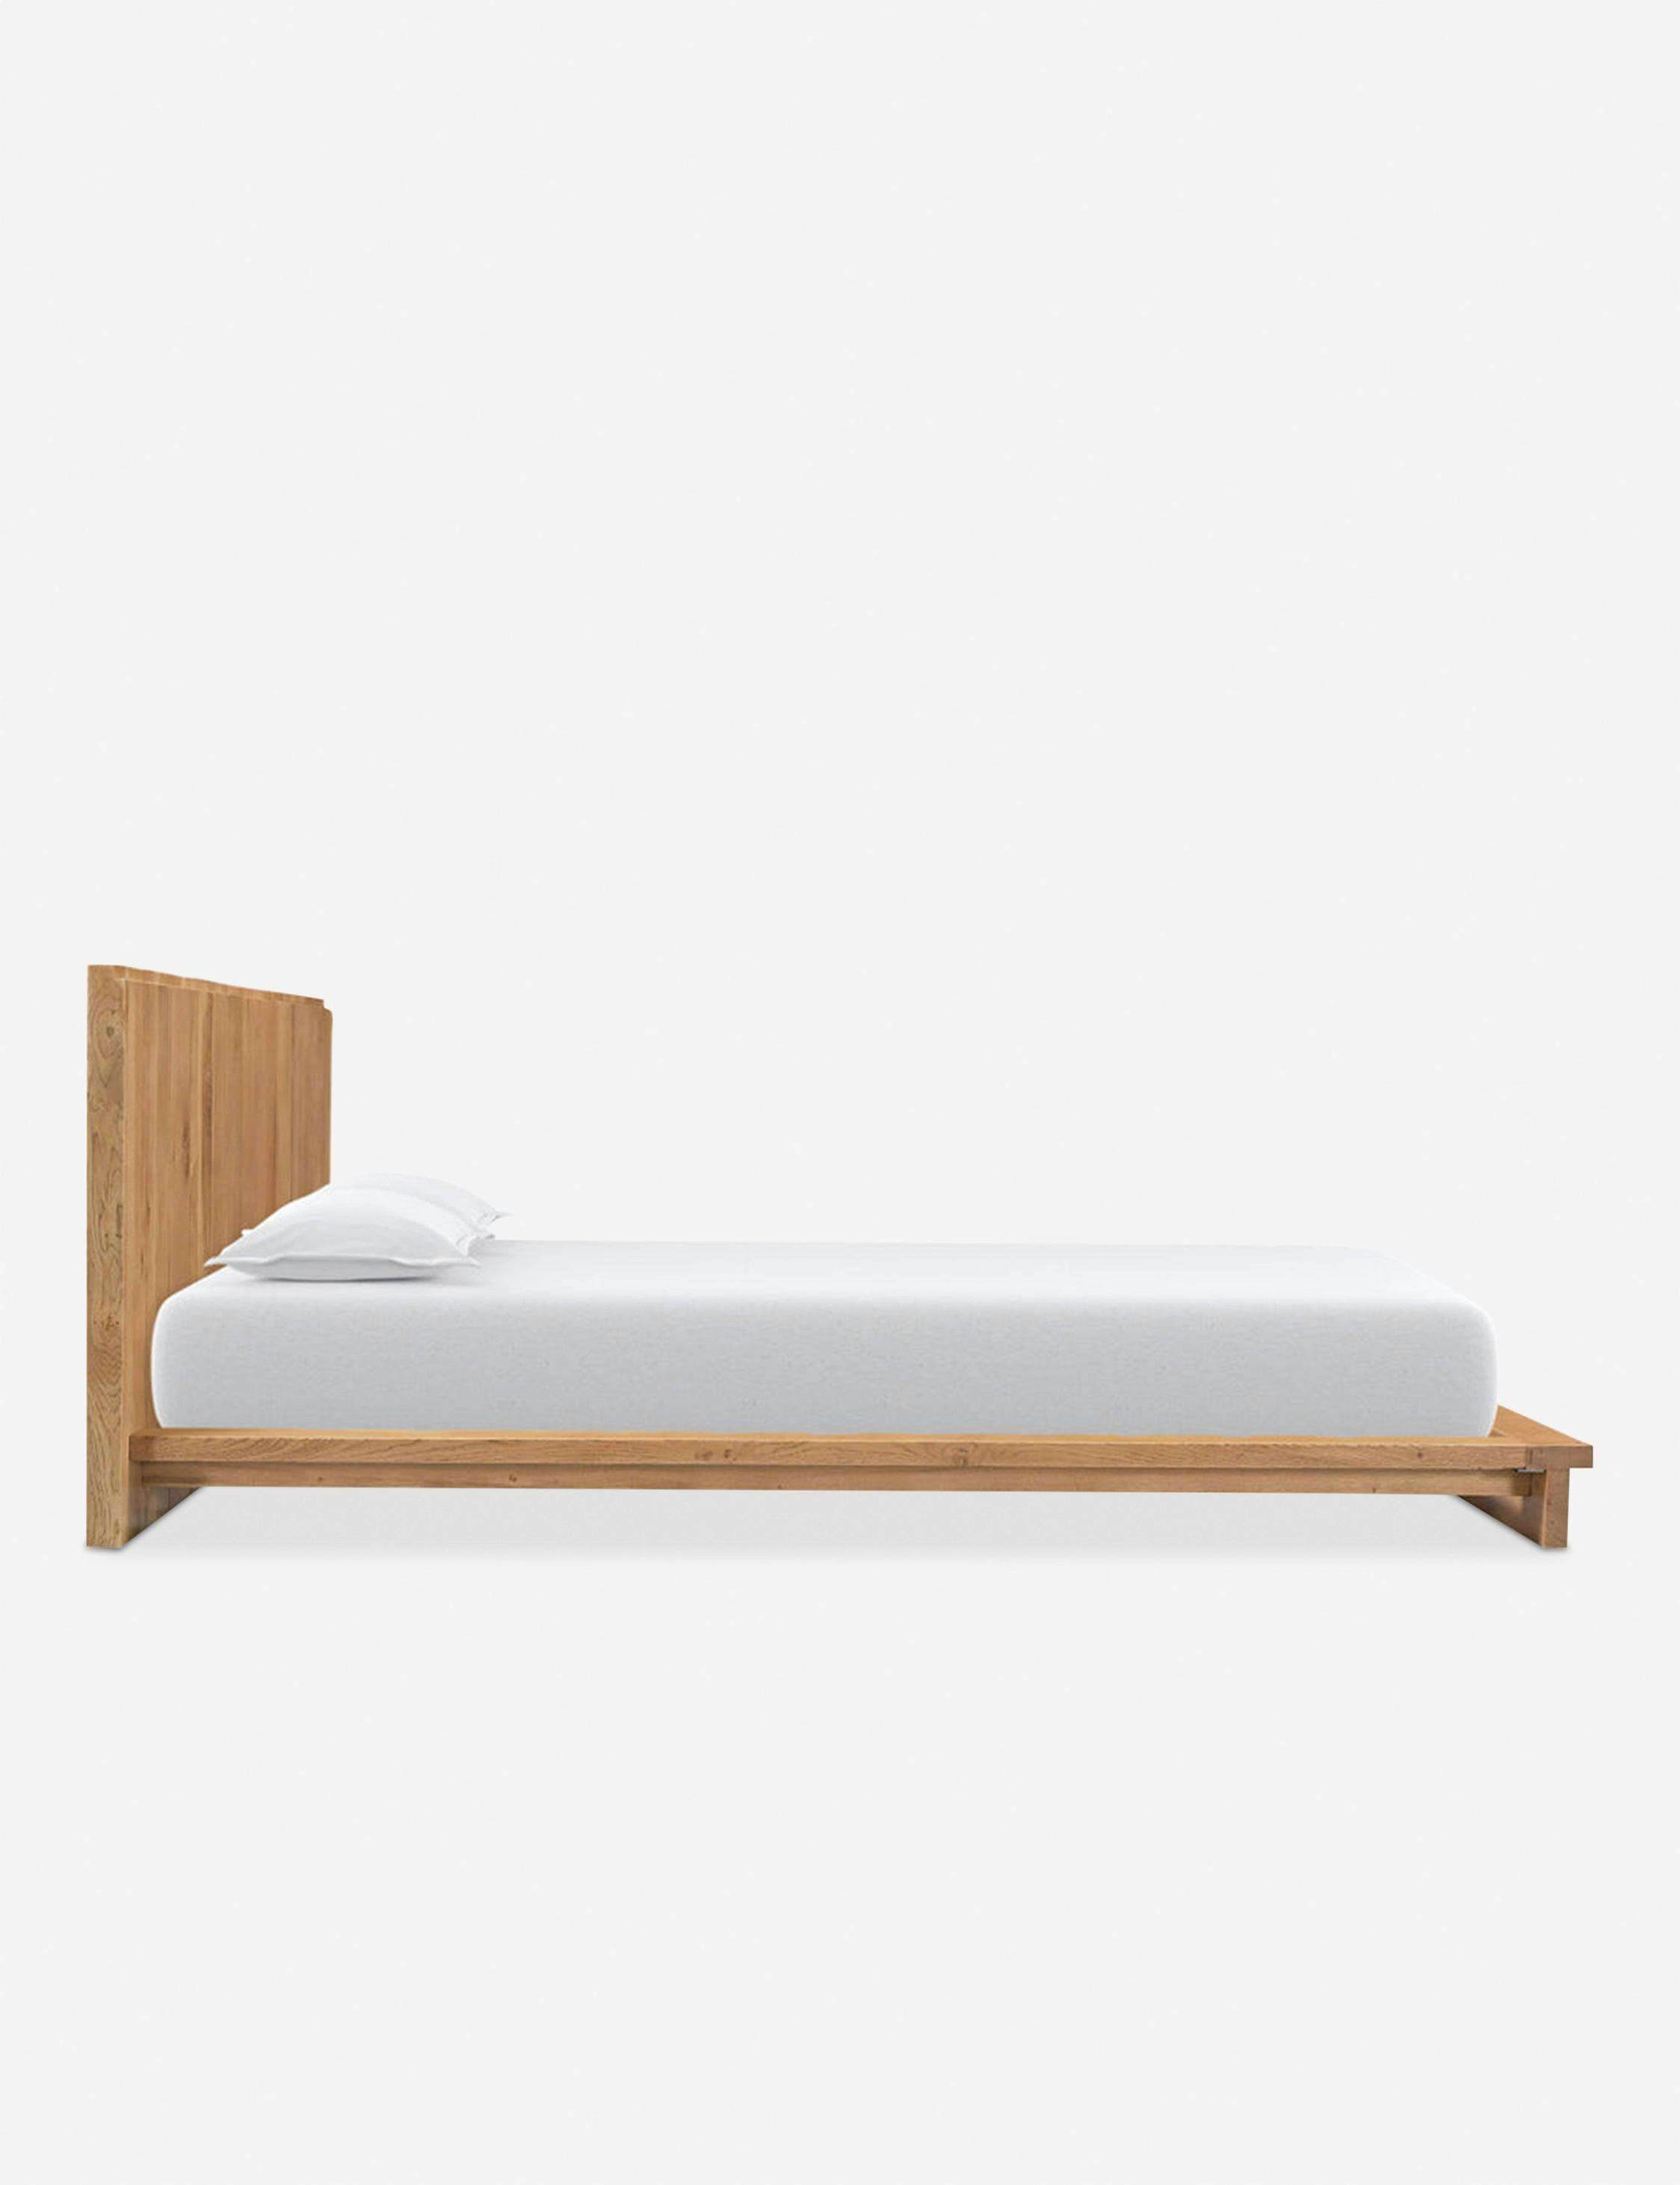 Moe's Home Collection Plank Queen Bed